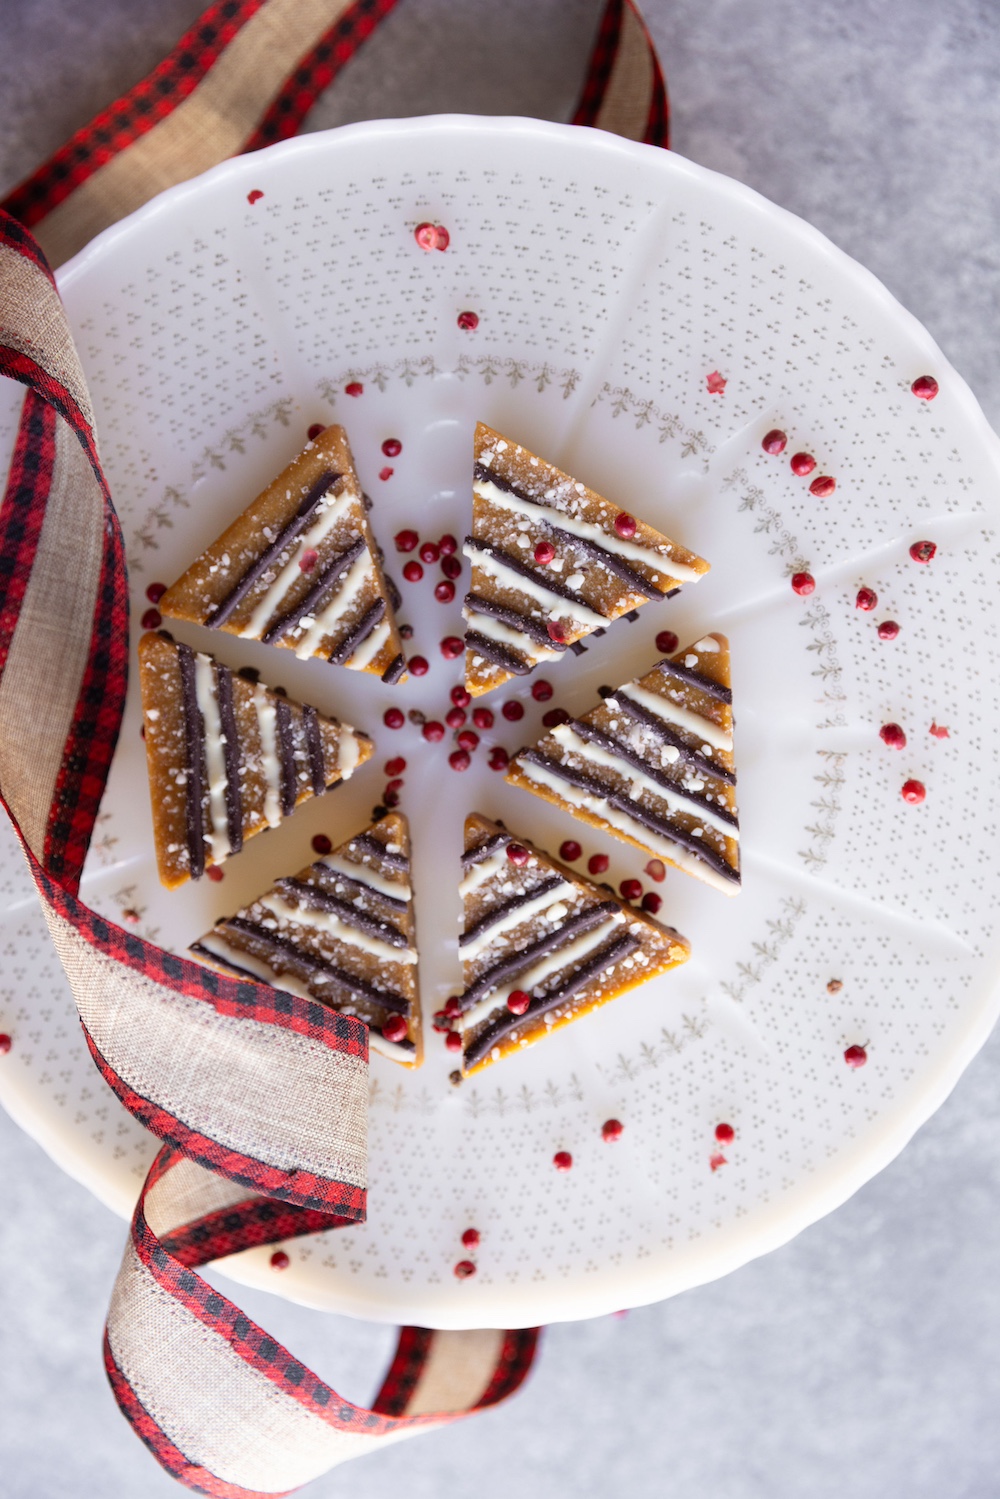 Dazzle Holiday Visitors with Pizzaz - Cache Toffee